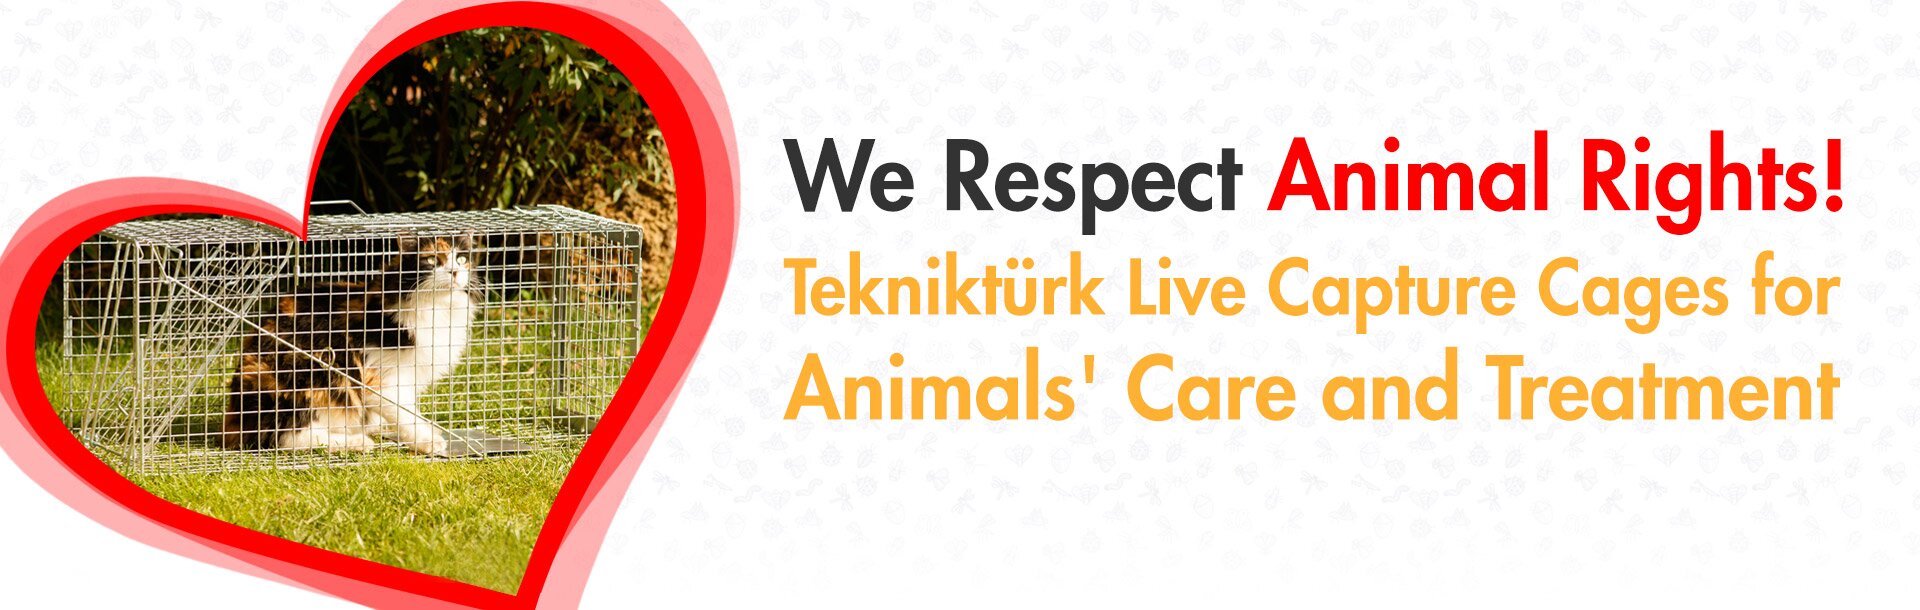 We Respect Animal Rights! Teknikturk Live Capture Cages for Animals' Care and Treatment